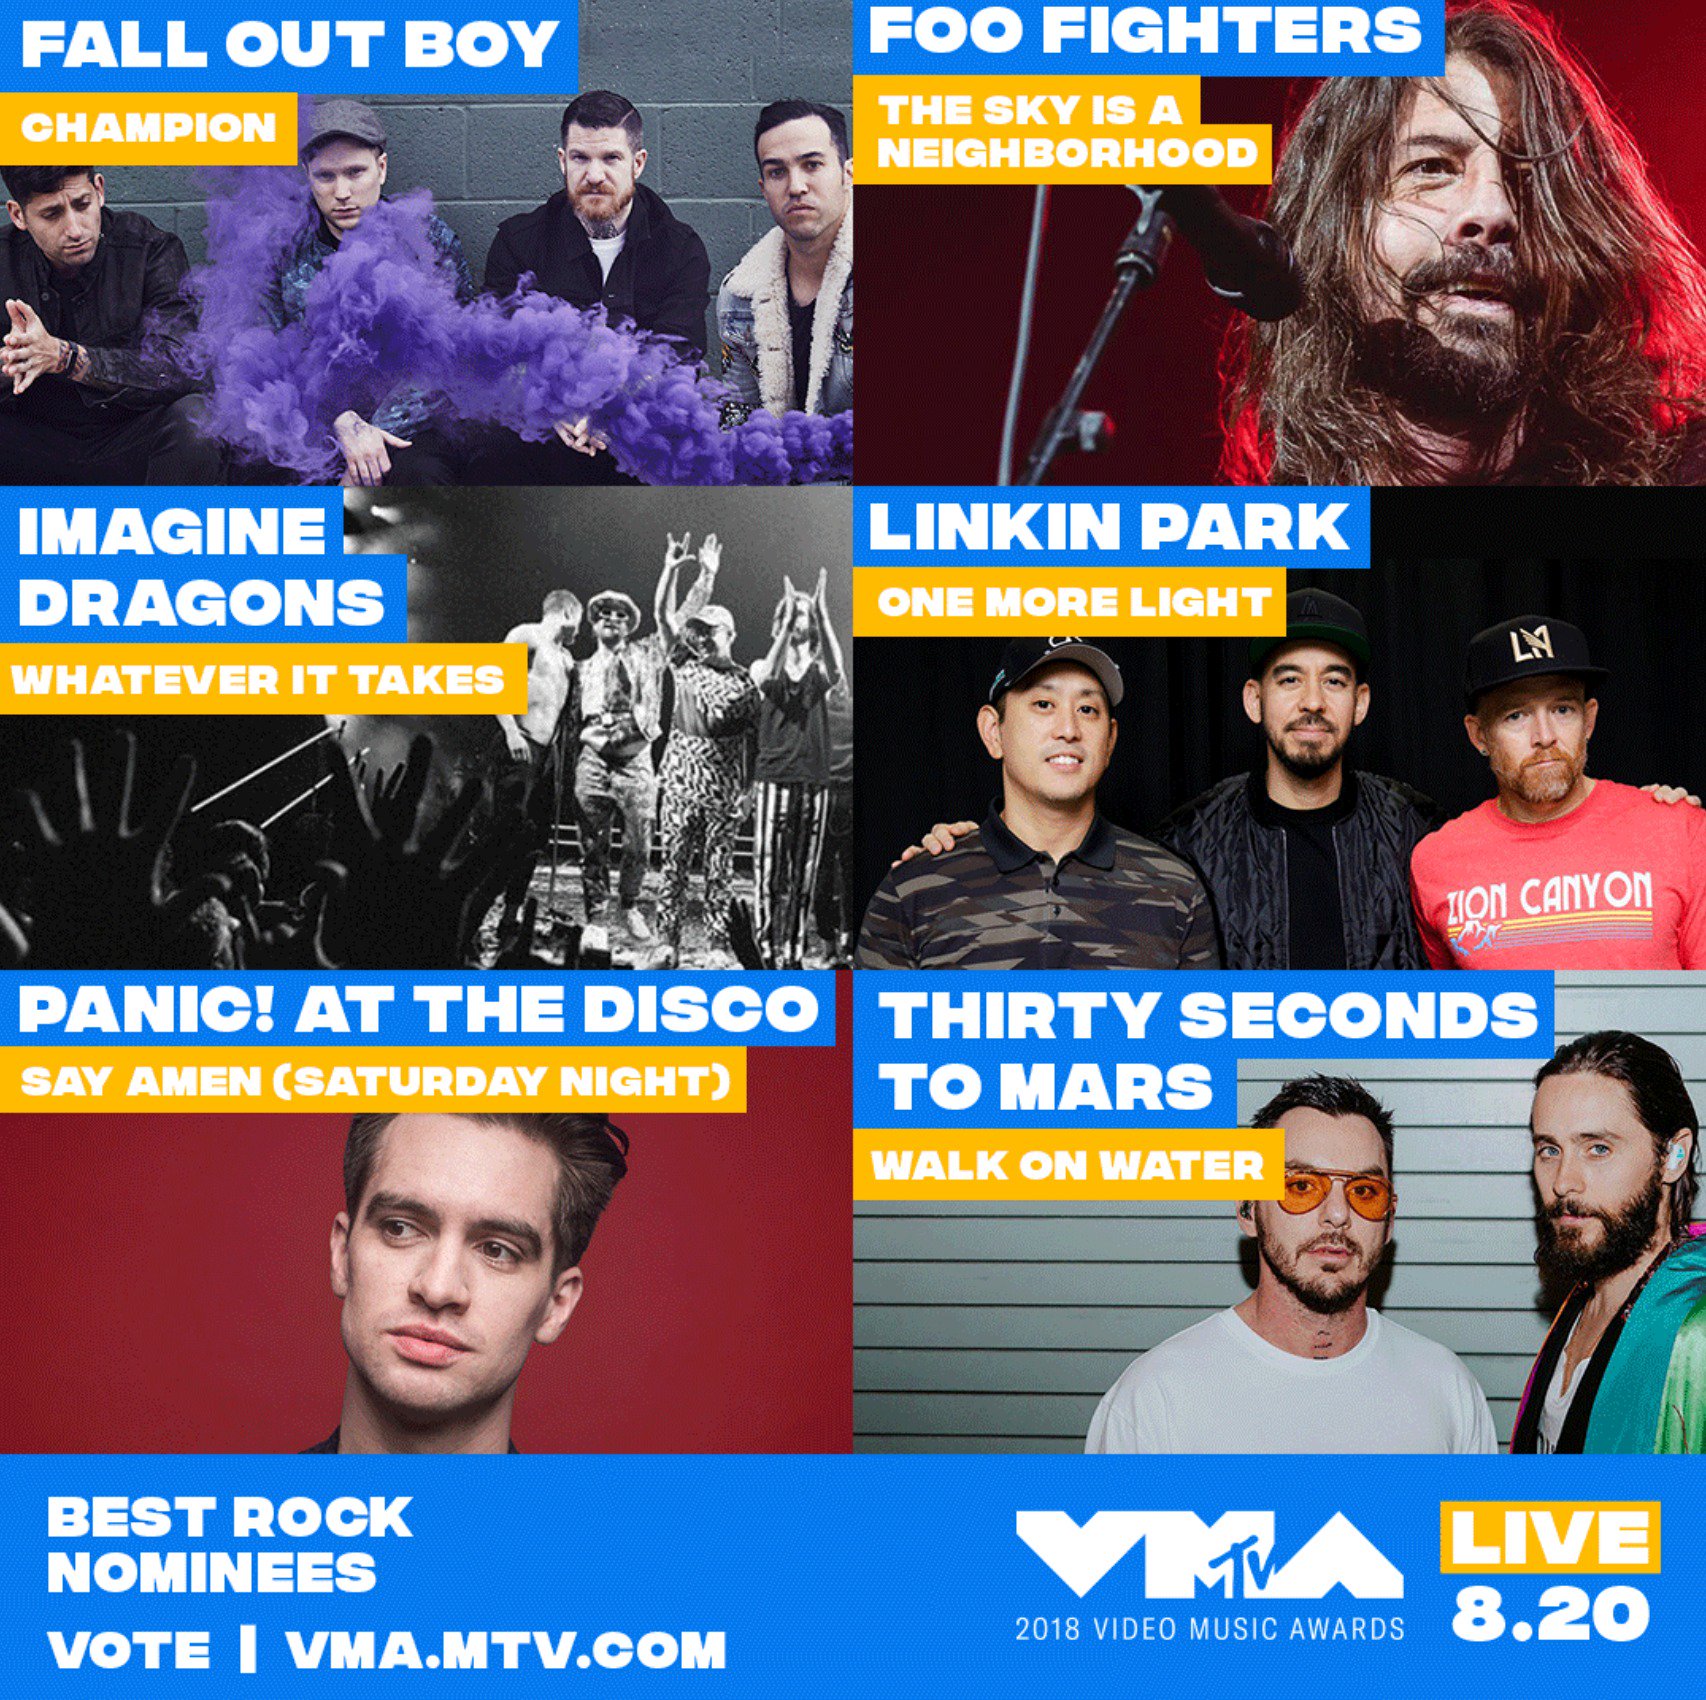 Fall Boy on Twitter: "wonder who will come out as the Champion for Best Rock at the #VMAs 🤔 psst, vote https://t.co/gYx1w2efc7 https://t.co/uu1xiufrA6" / Twitter